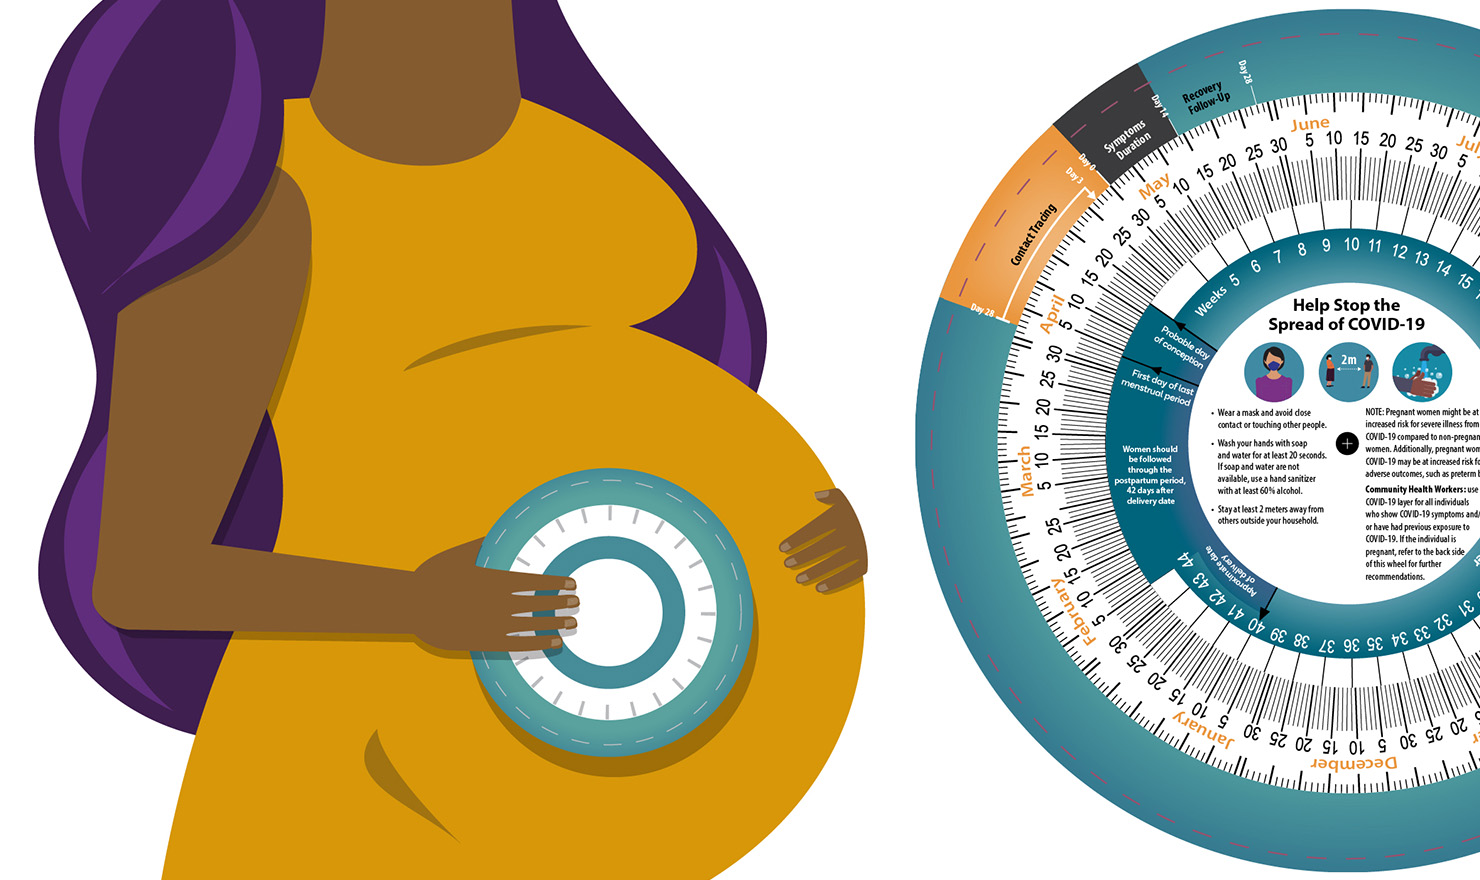 A pregnant woman and the adapted pregnancy wheel, which includes COVID-19 prevention messages to help Community Health Workers (CHWs).